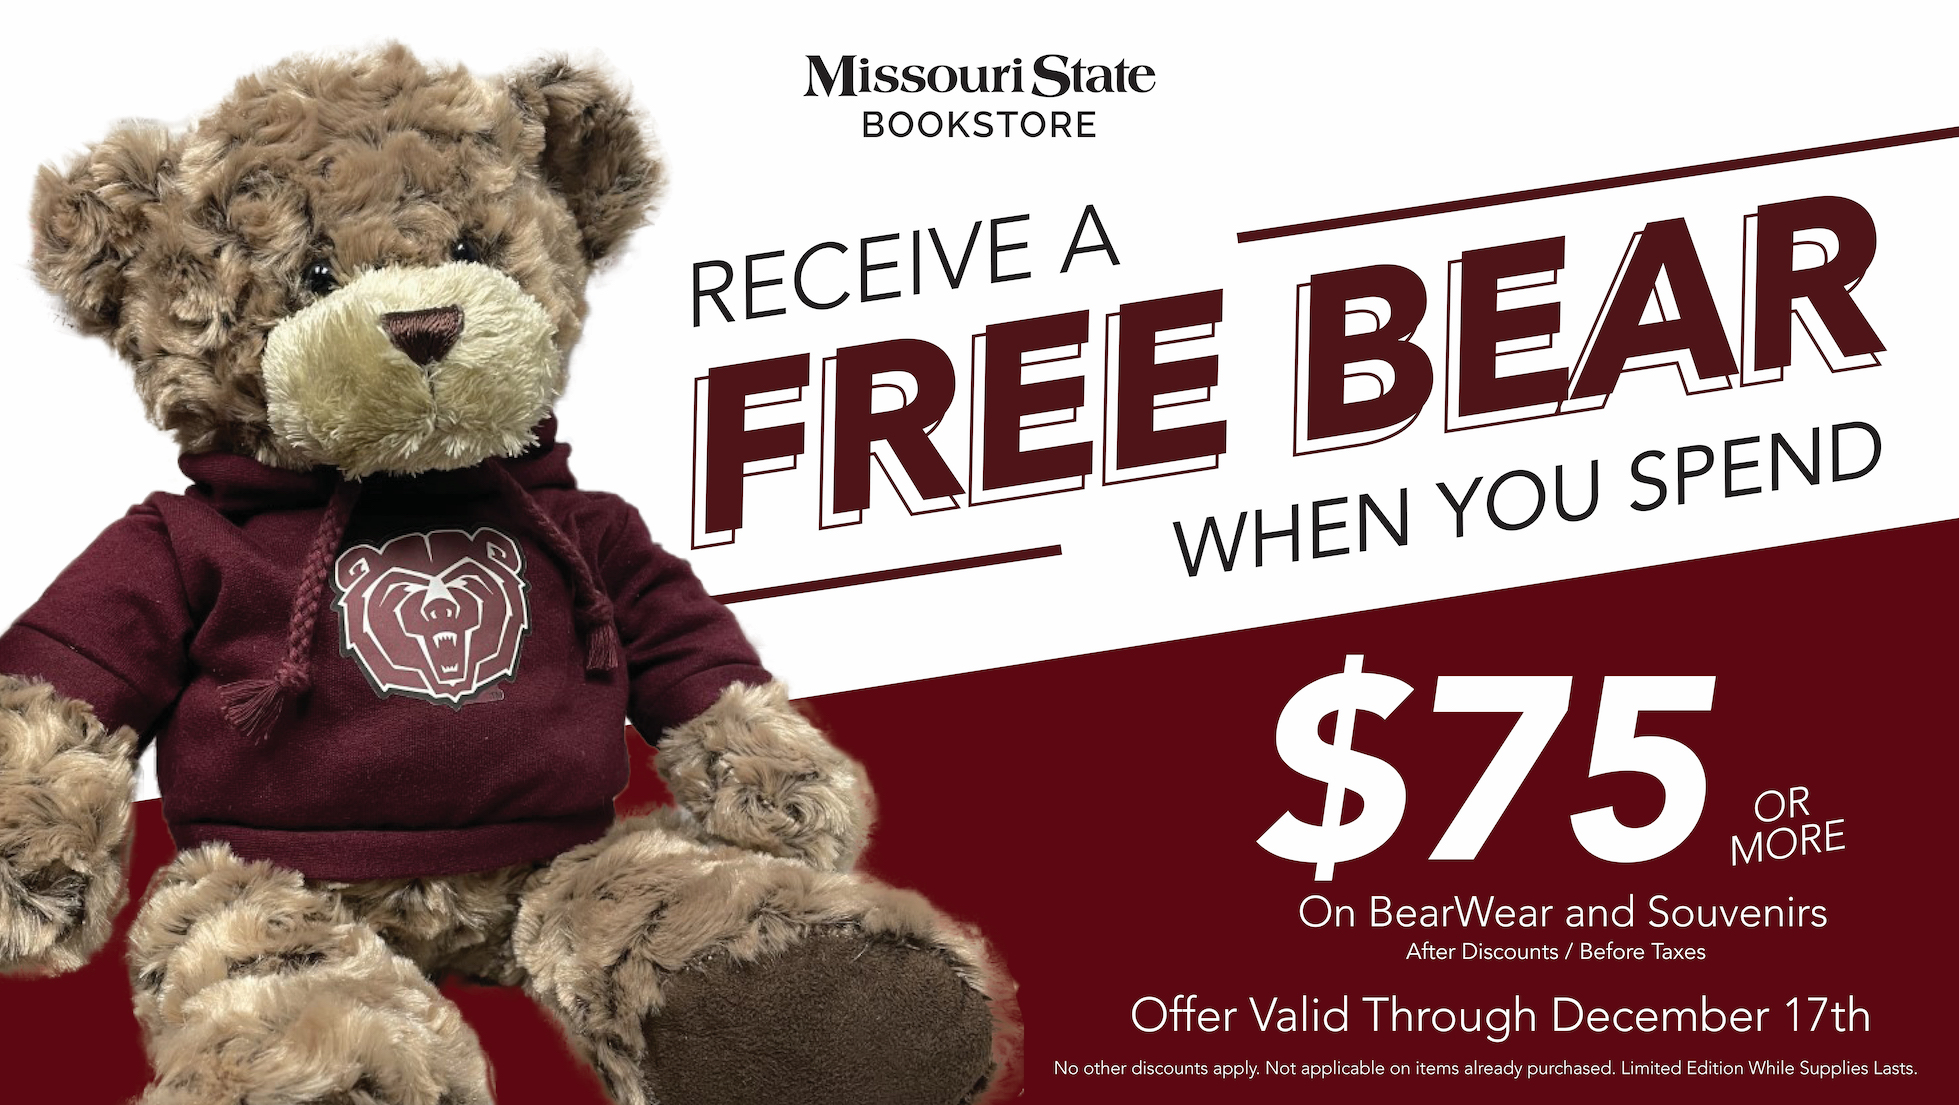 Receive a free bear when you spend 75 dollars or more on BearWear and Souvenirs!